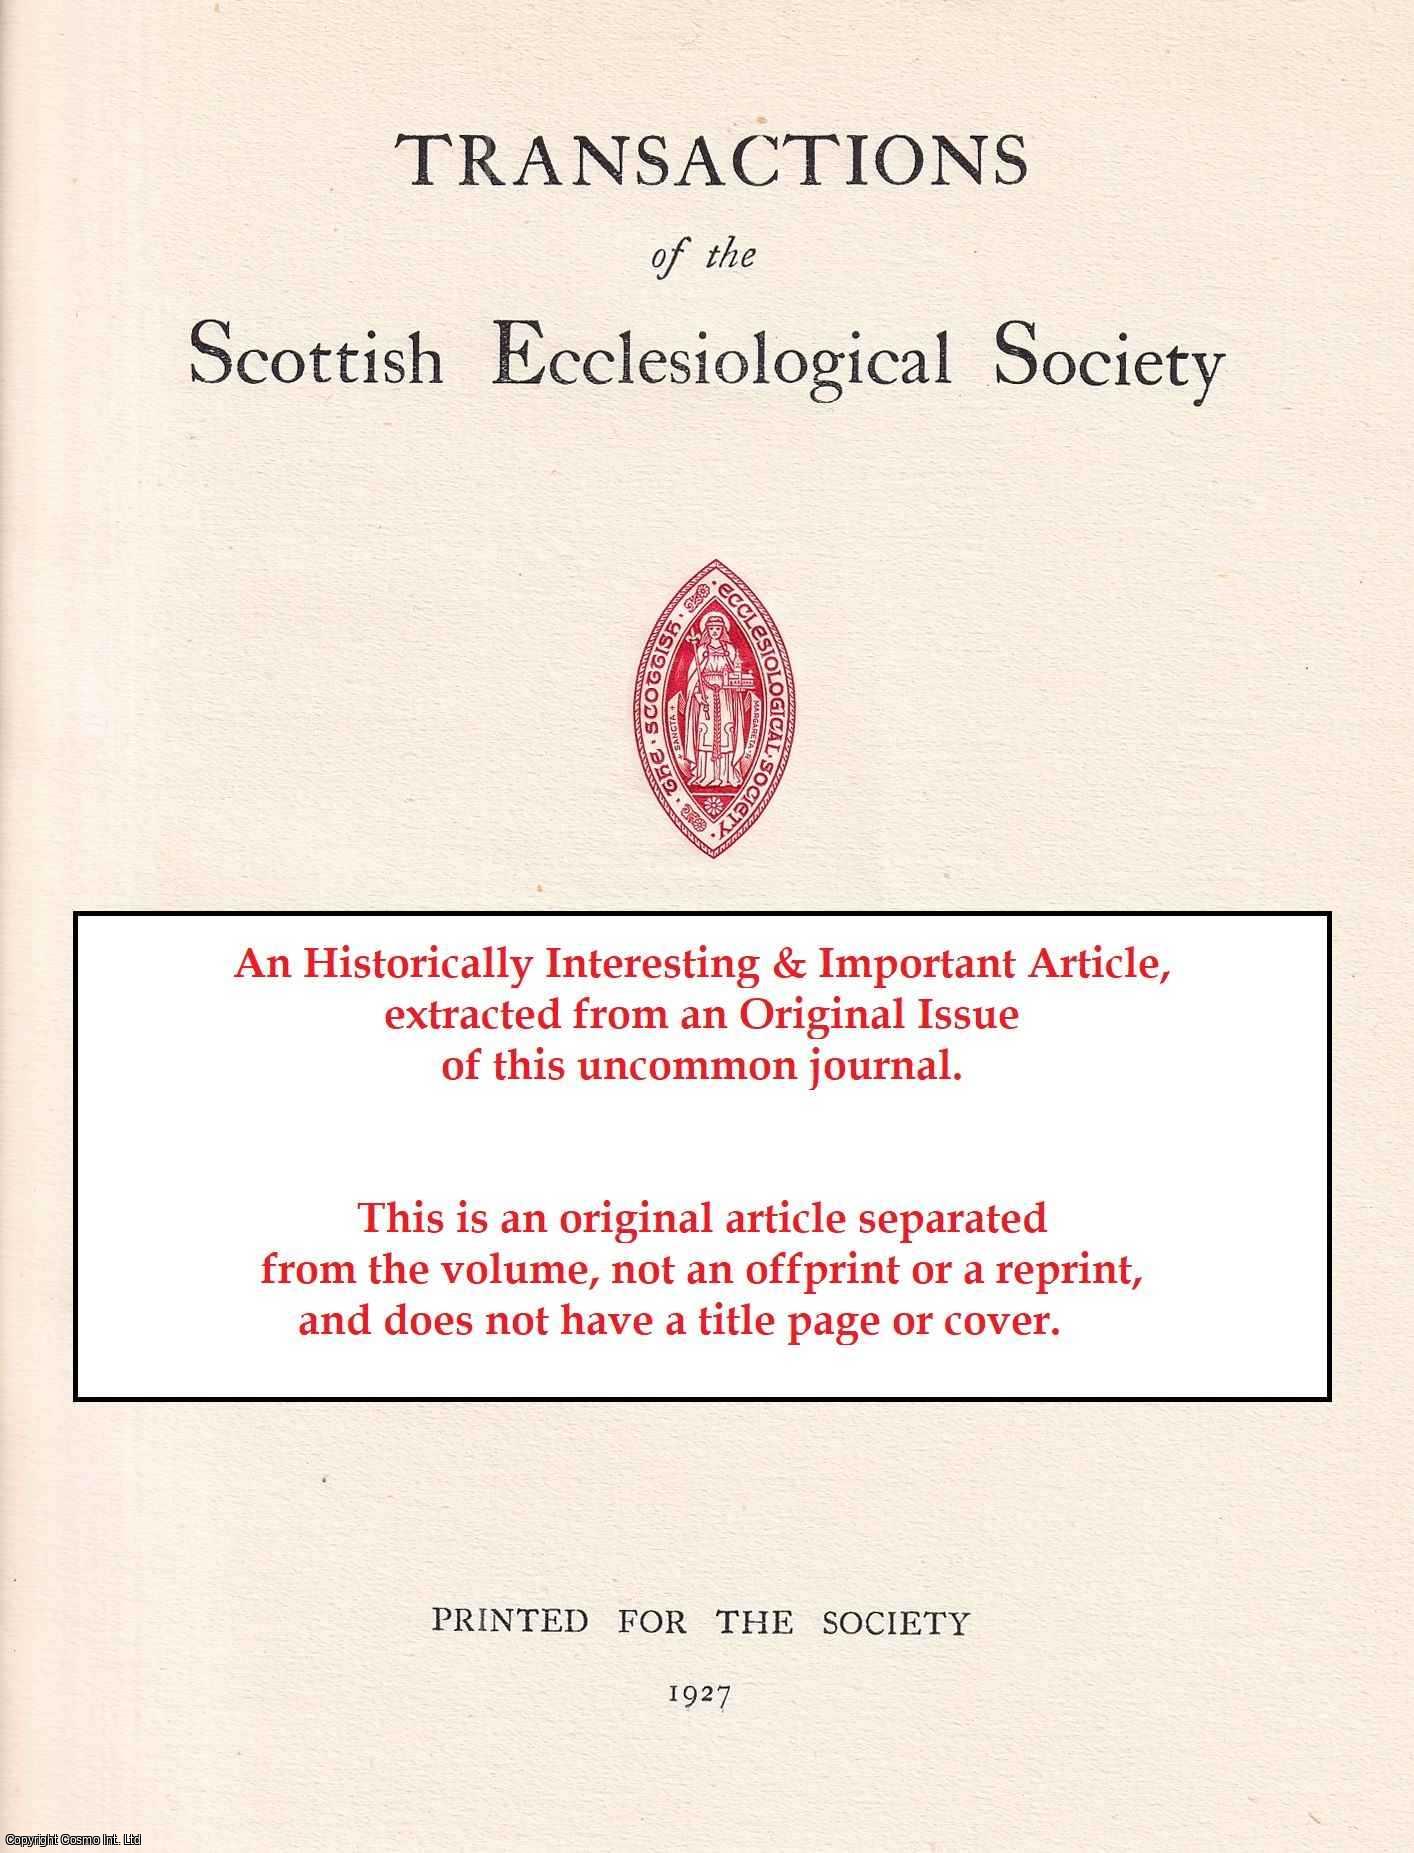 Rev Will Burnett - The Church of St. John the Baptist, Adel, Yorkshire. An original article from the Transactions of the Scottish Ecclesiological Society, 1943.